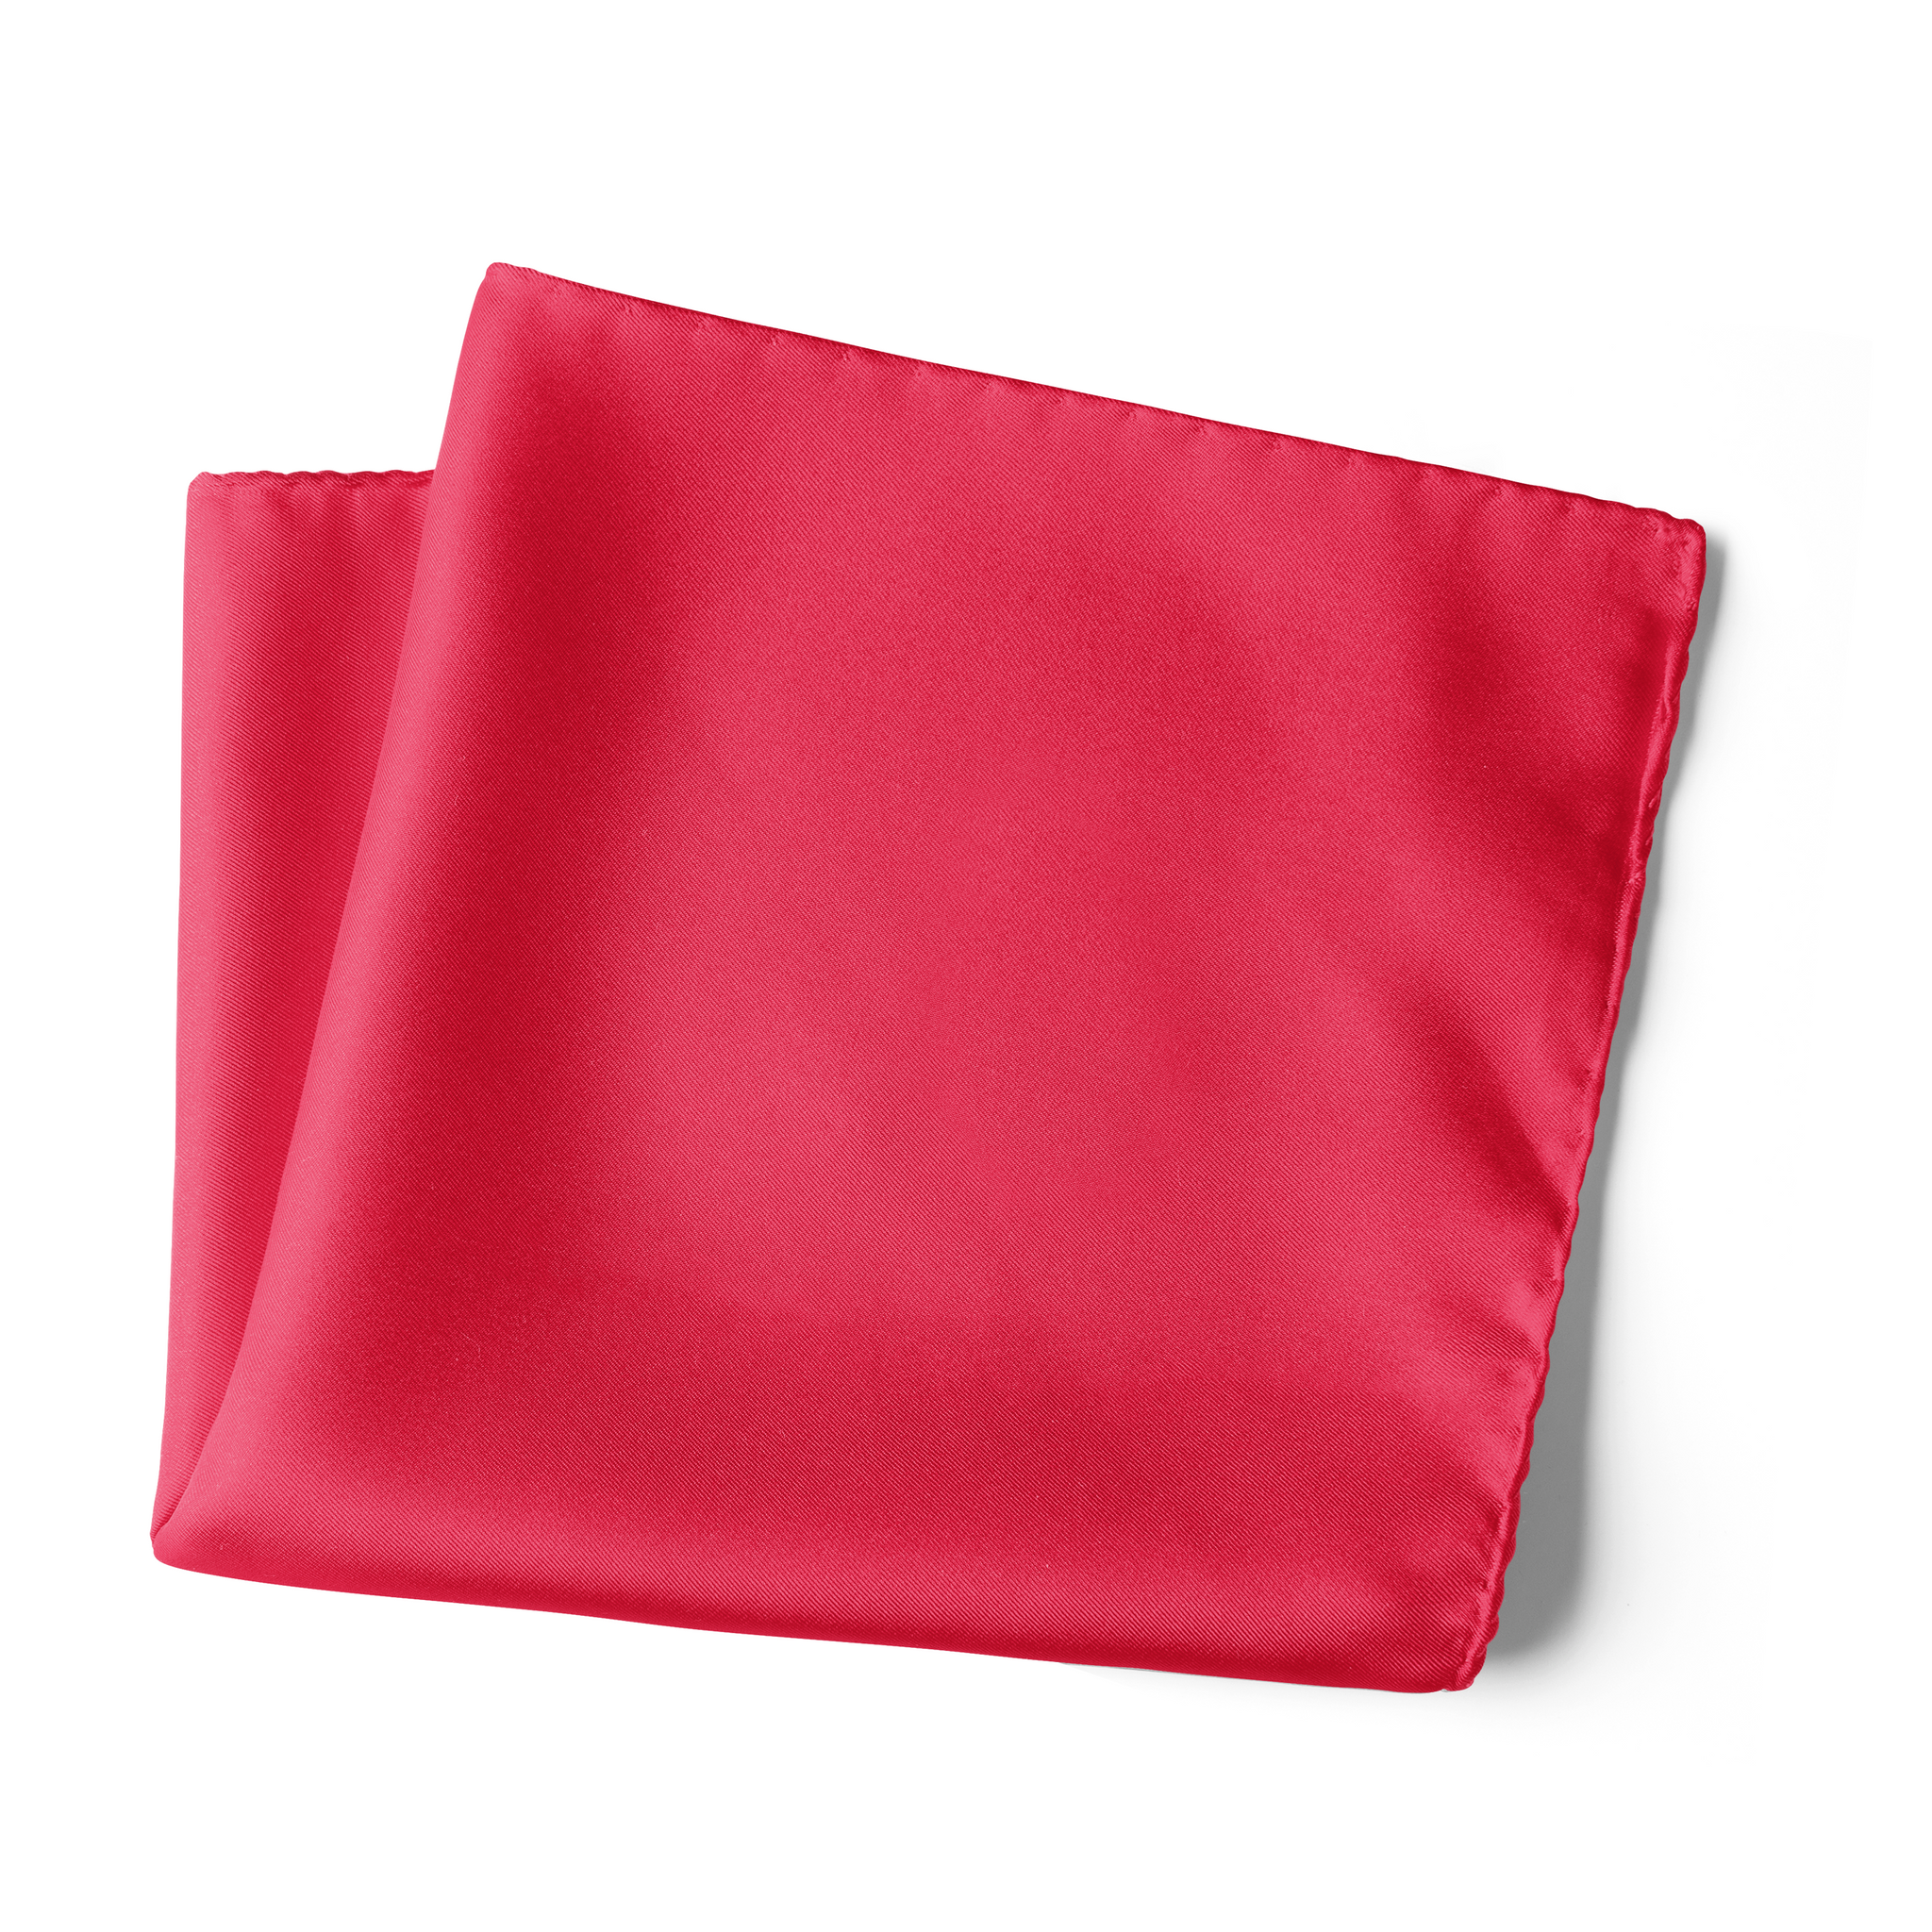 Chokore Paradise Pink Pure Silk Pocket Square, from the Solids Line